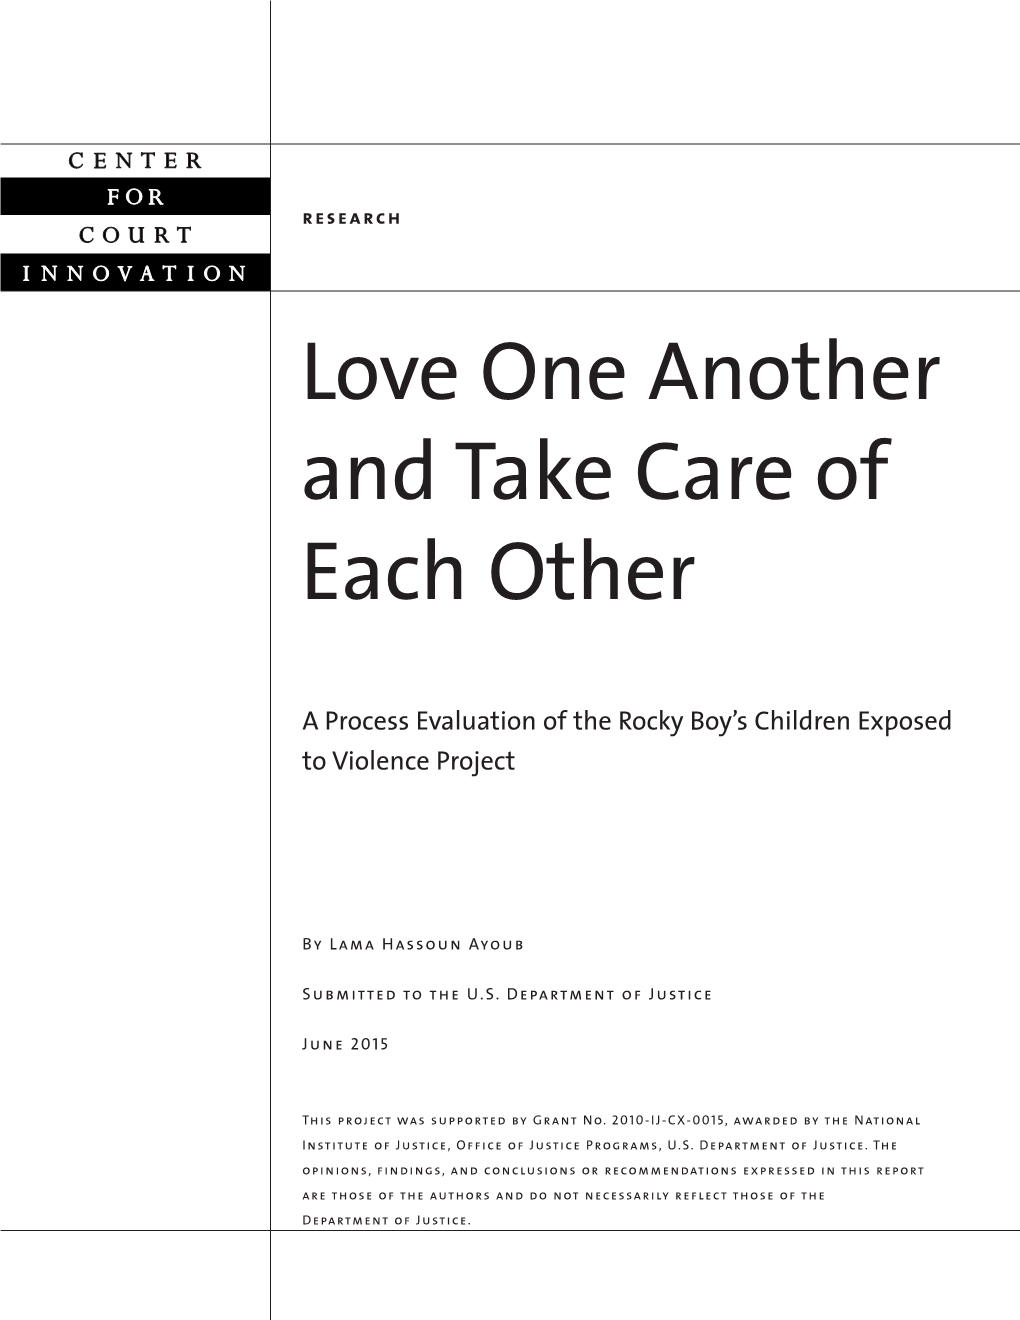 Love One Another and Take Care of Each Other